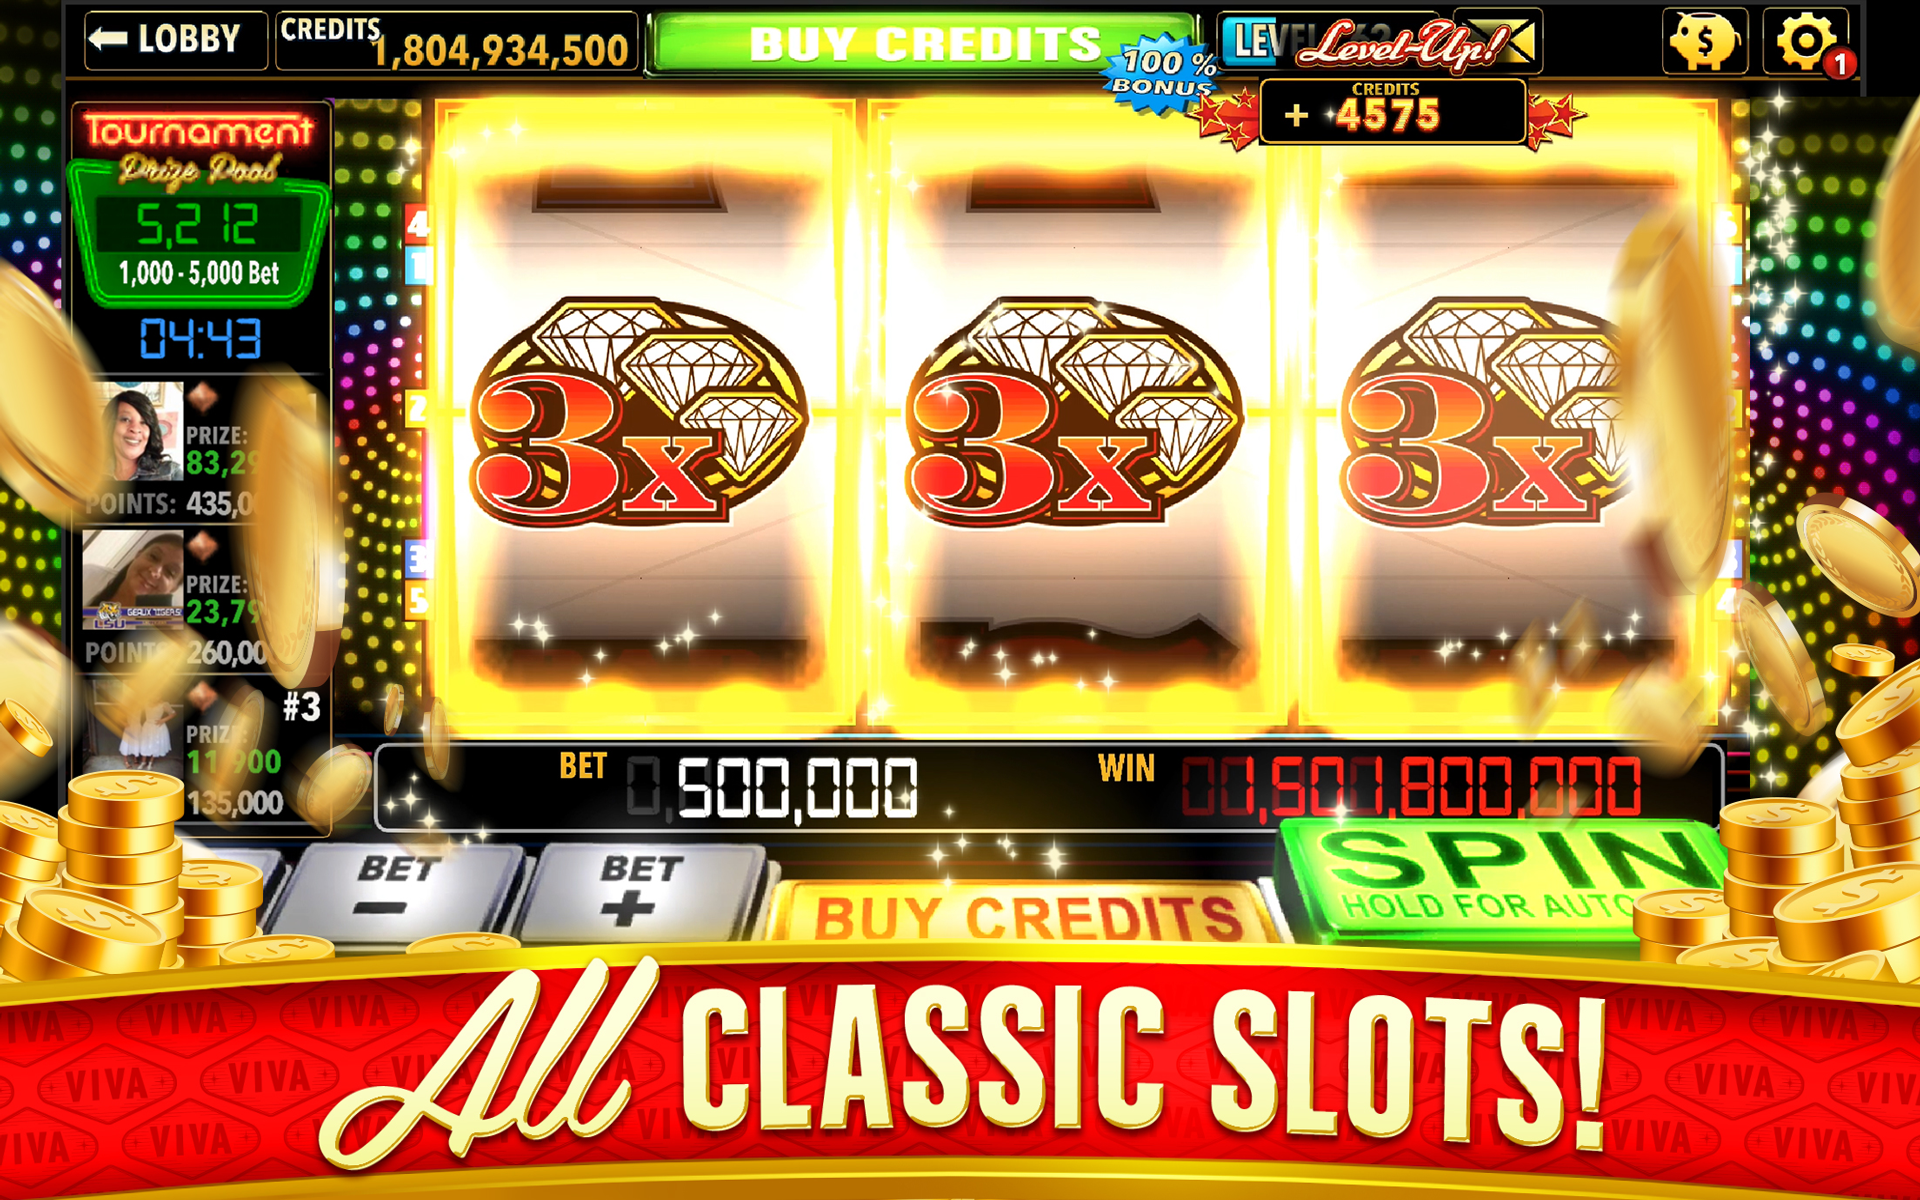 Behind the Scenes: A Look at How Slot Games are Developed